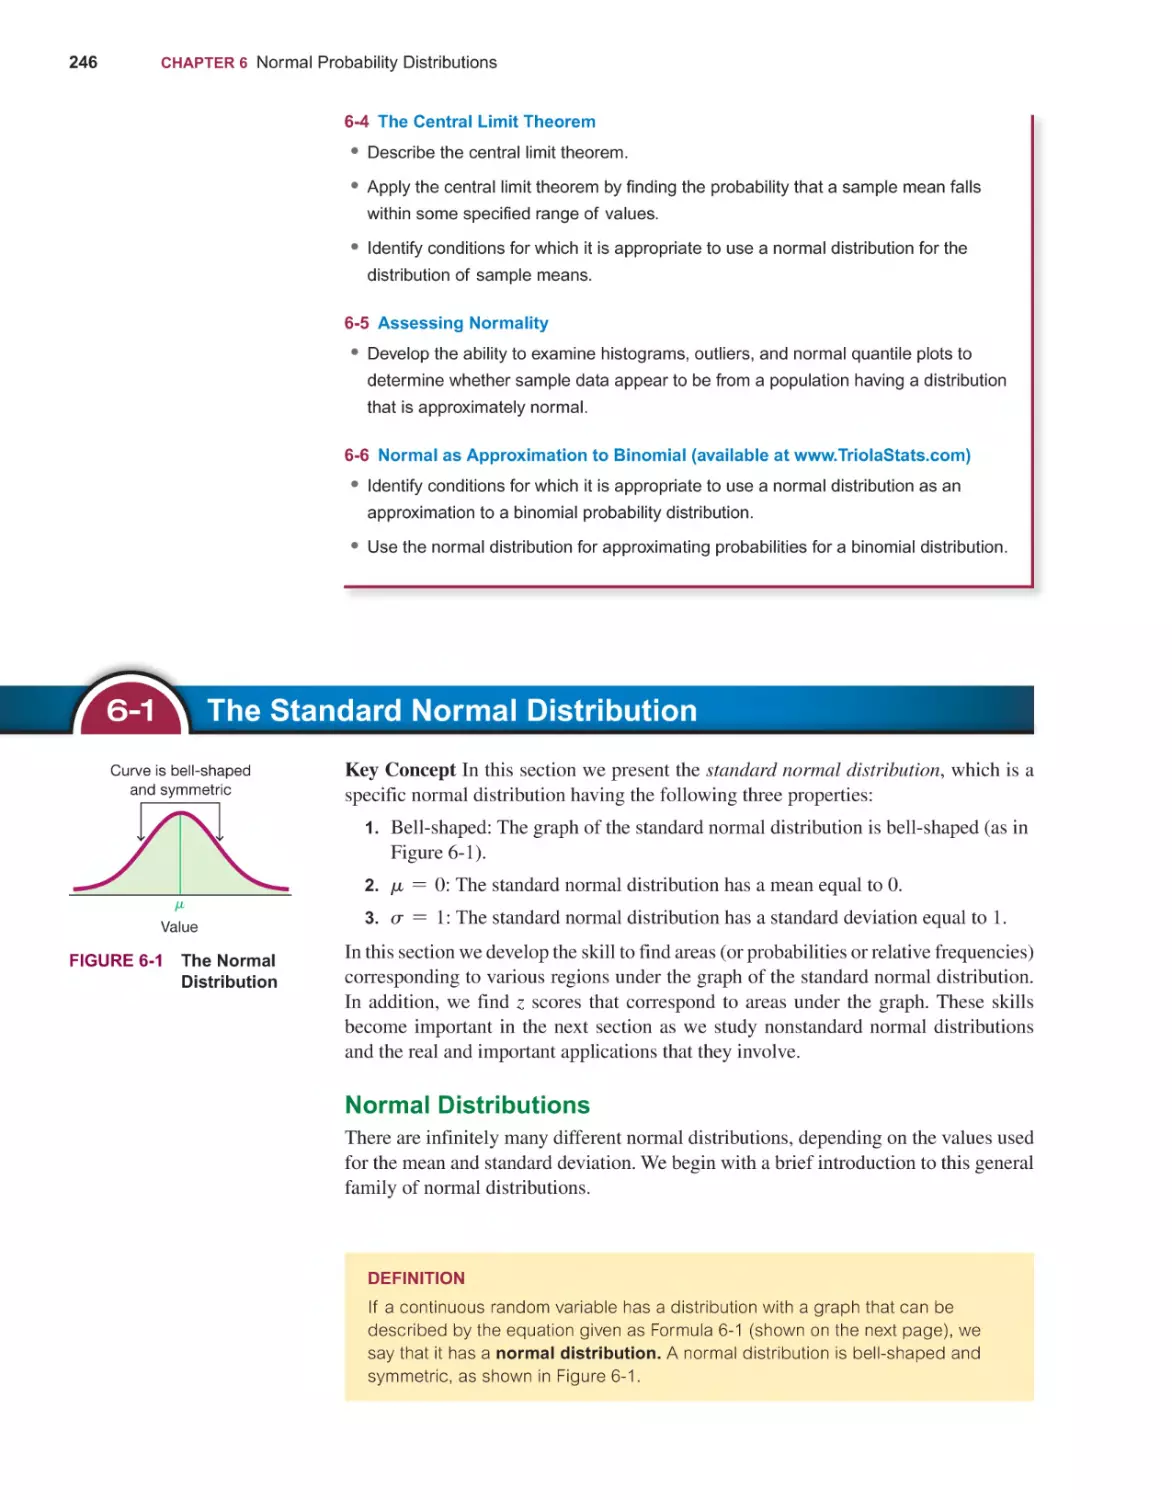 6‐1 The Standard Normal Distribution